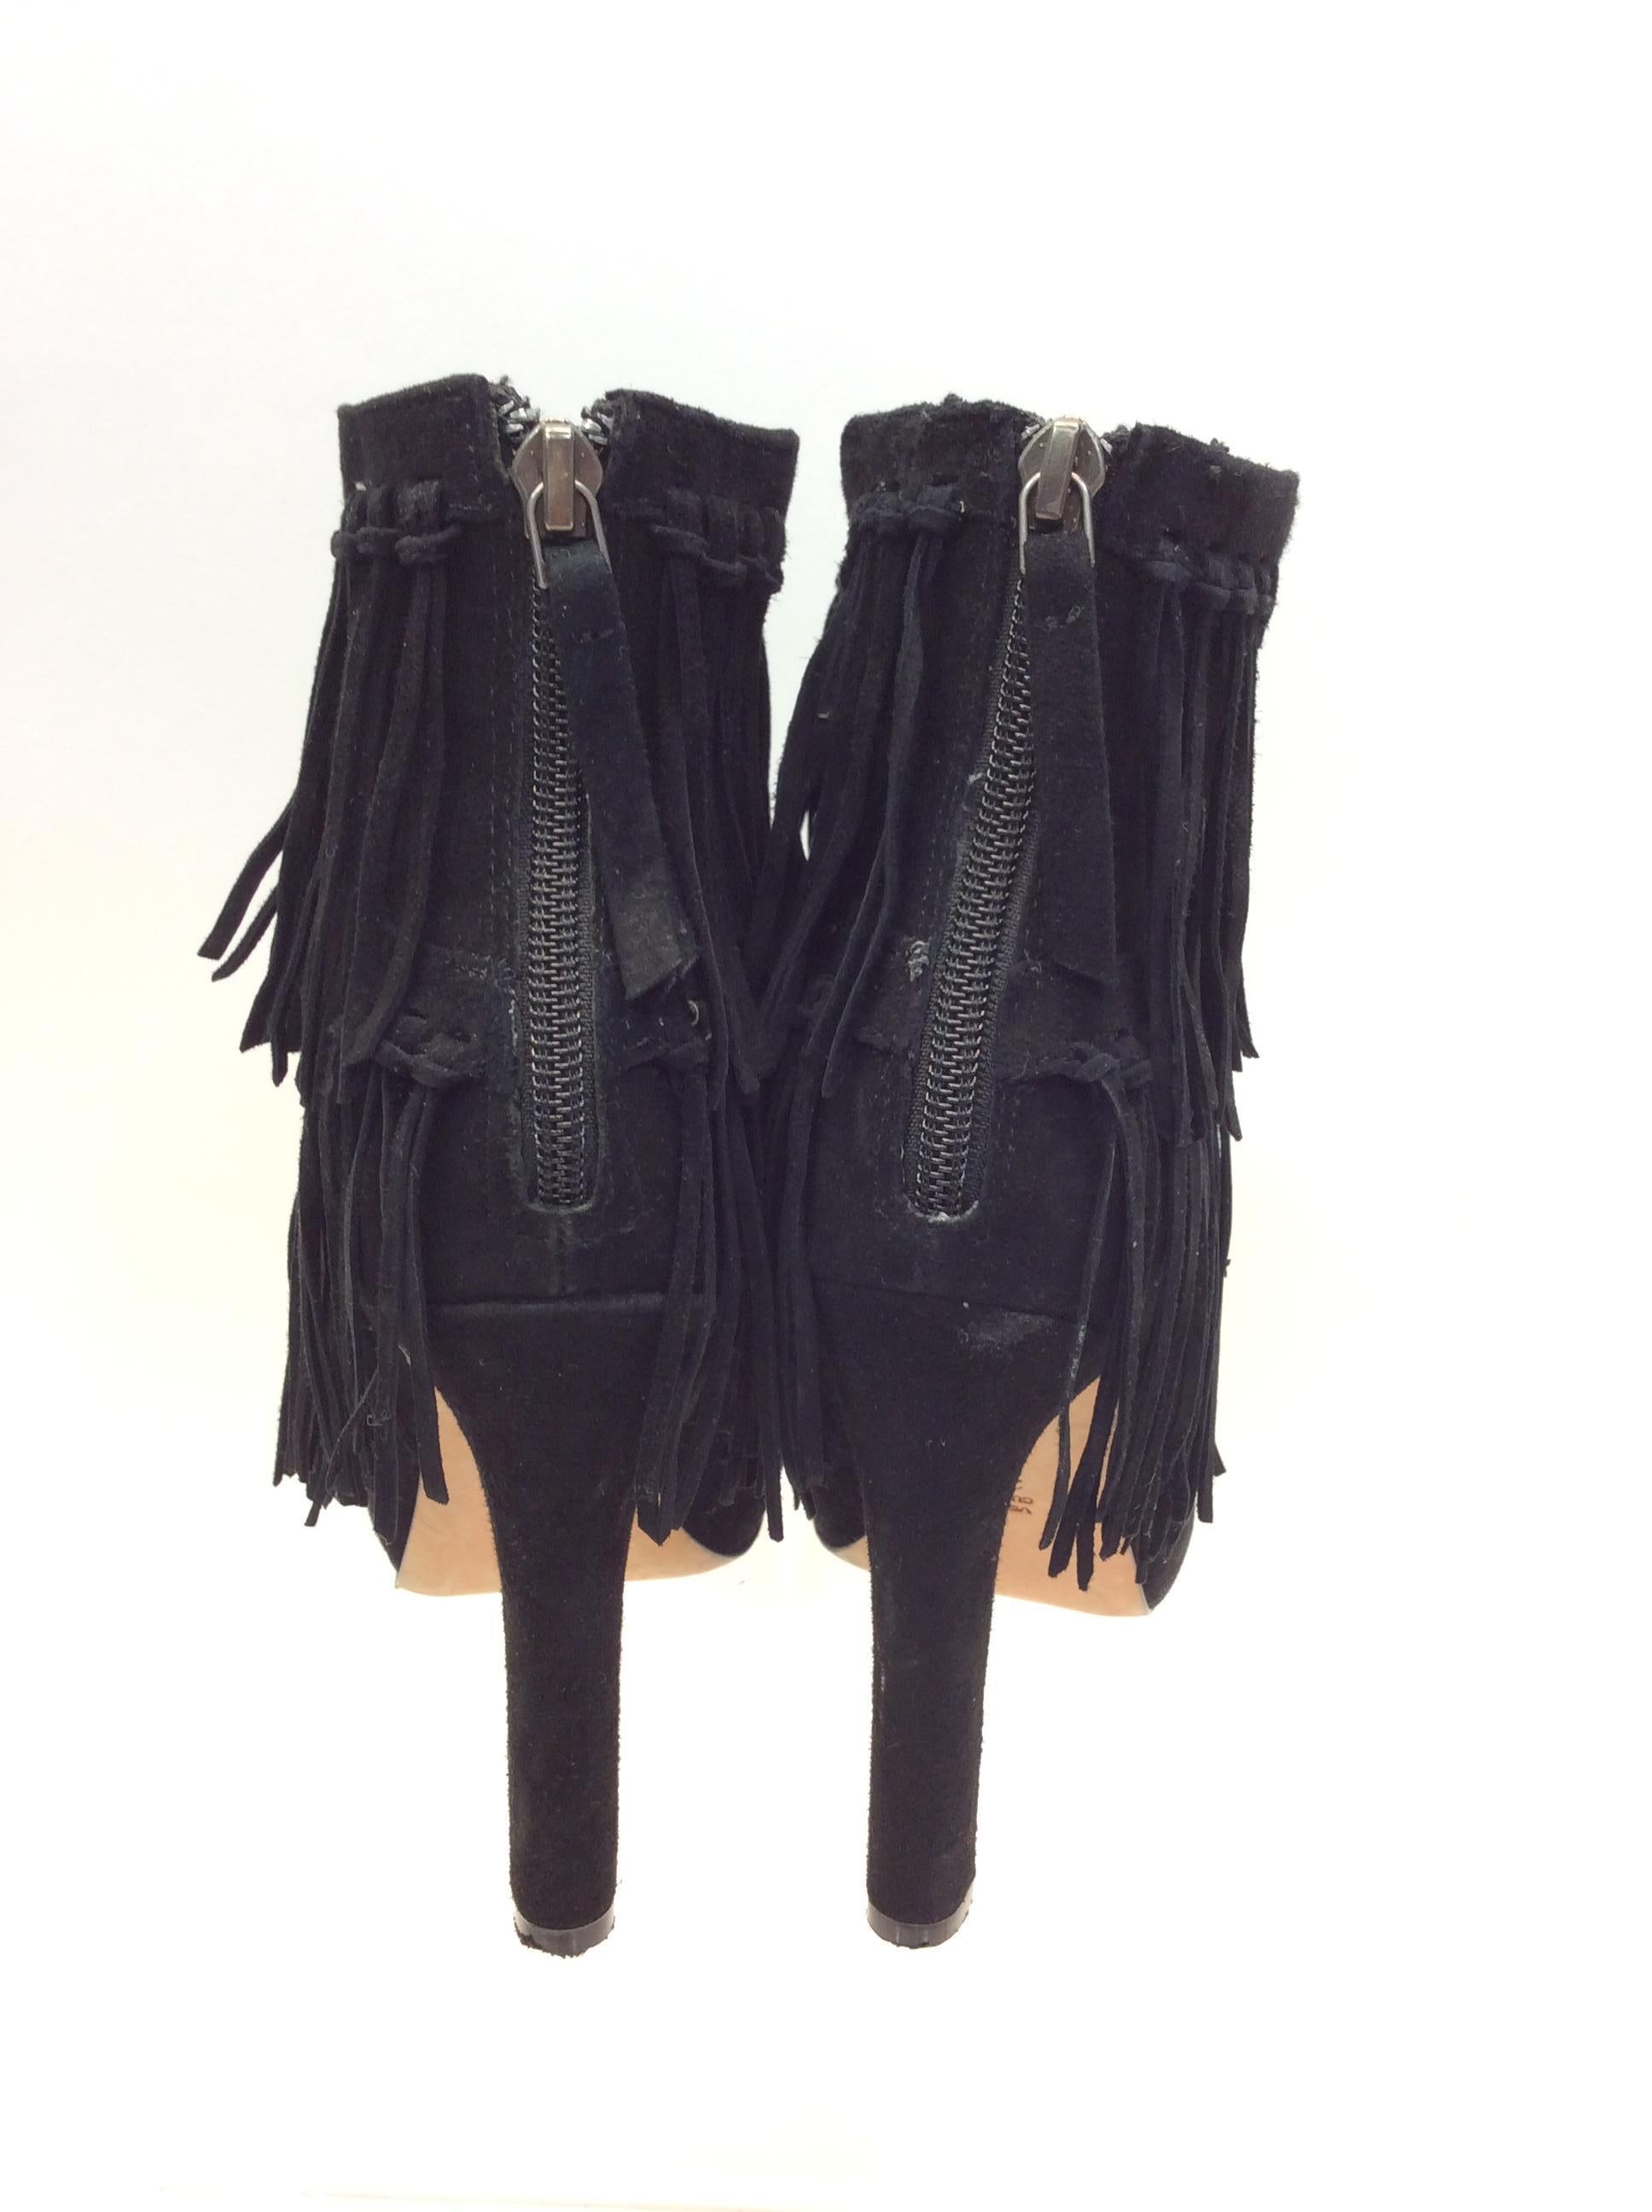 Jean-Michel Cazabat Black Suede Fringe Bootie In Excellent Condition For Sale In Narberth, PA